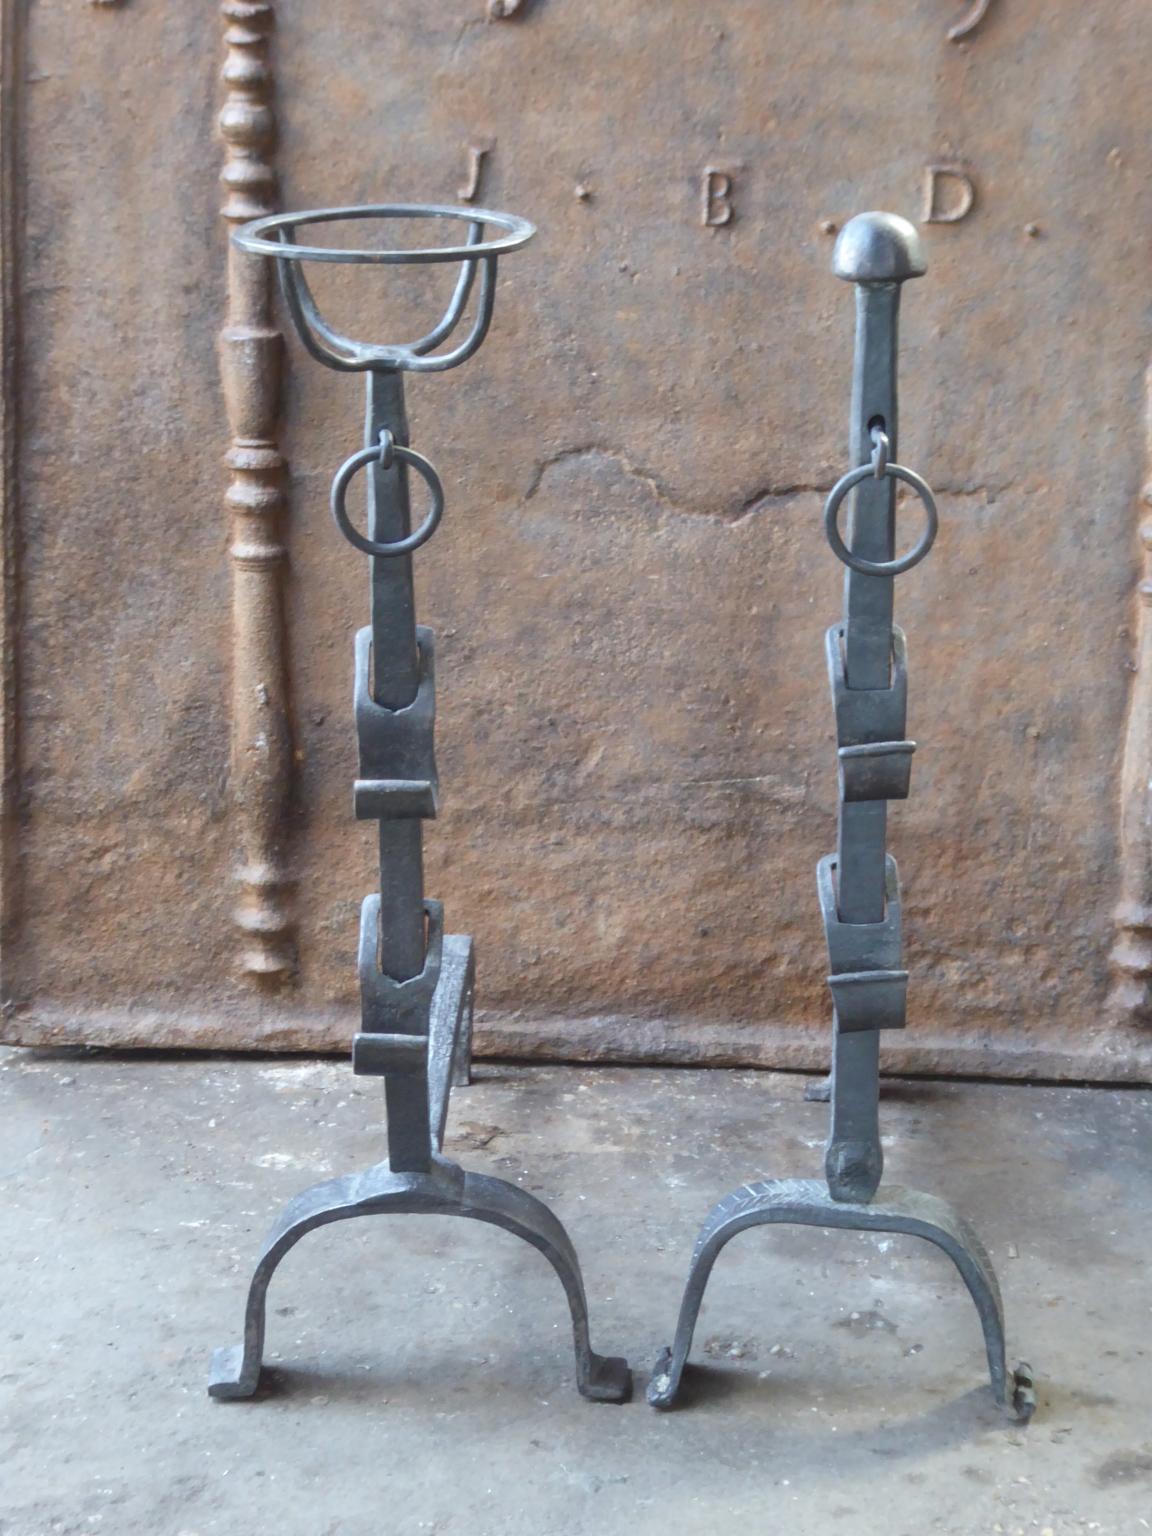 18th century French Louis XV andirons. The andirons are made of wrought iron. They have spit hooks to grill food. They are called 'pair de marriage' as the wife and husband each brought their own andiron to make a pair. The andirons are in a good